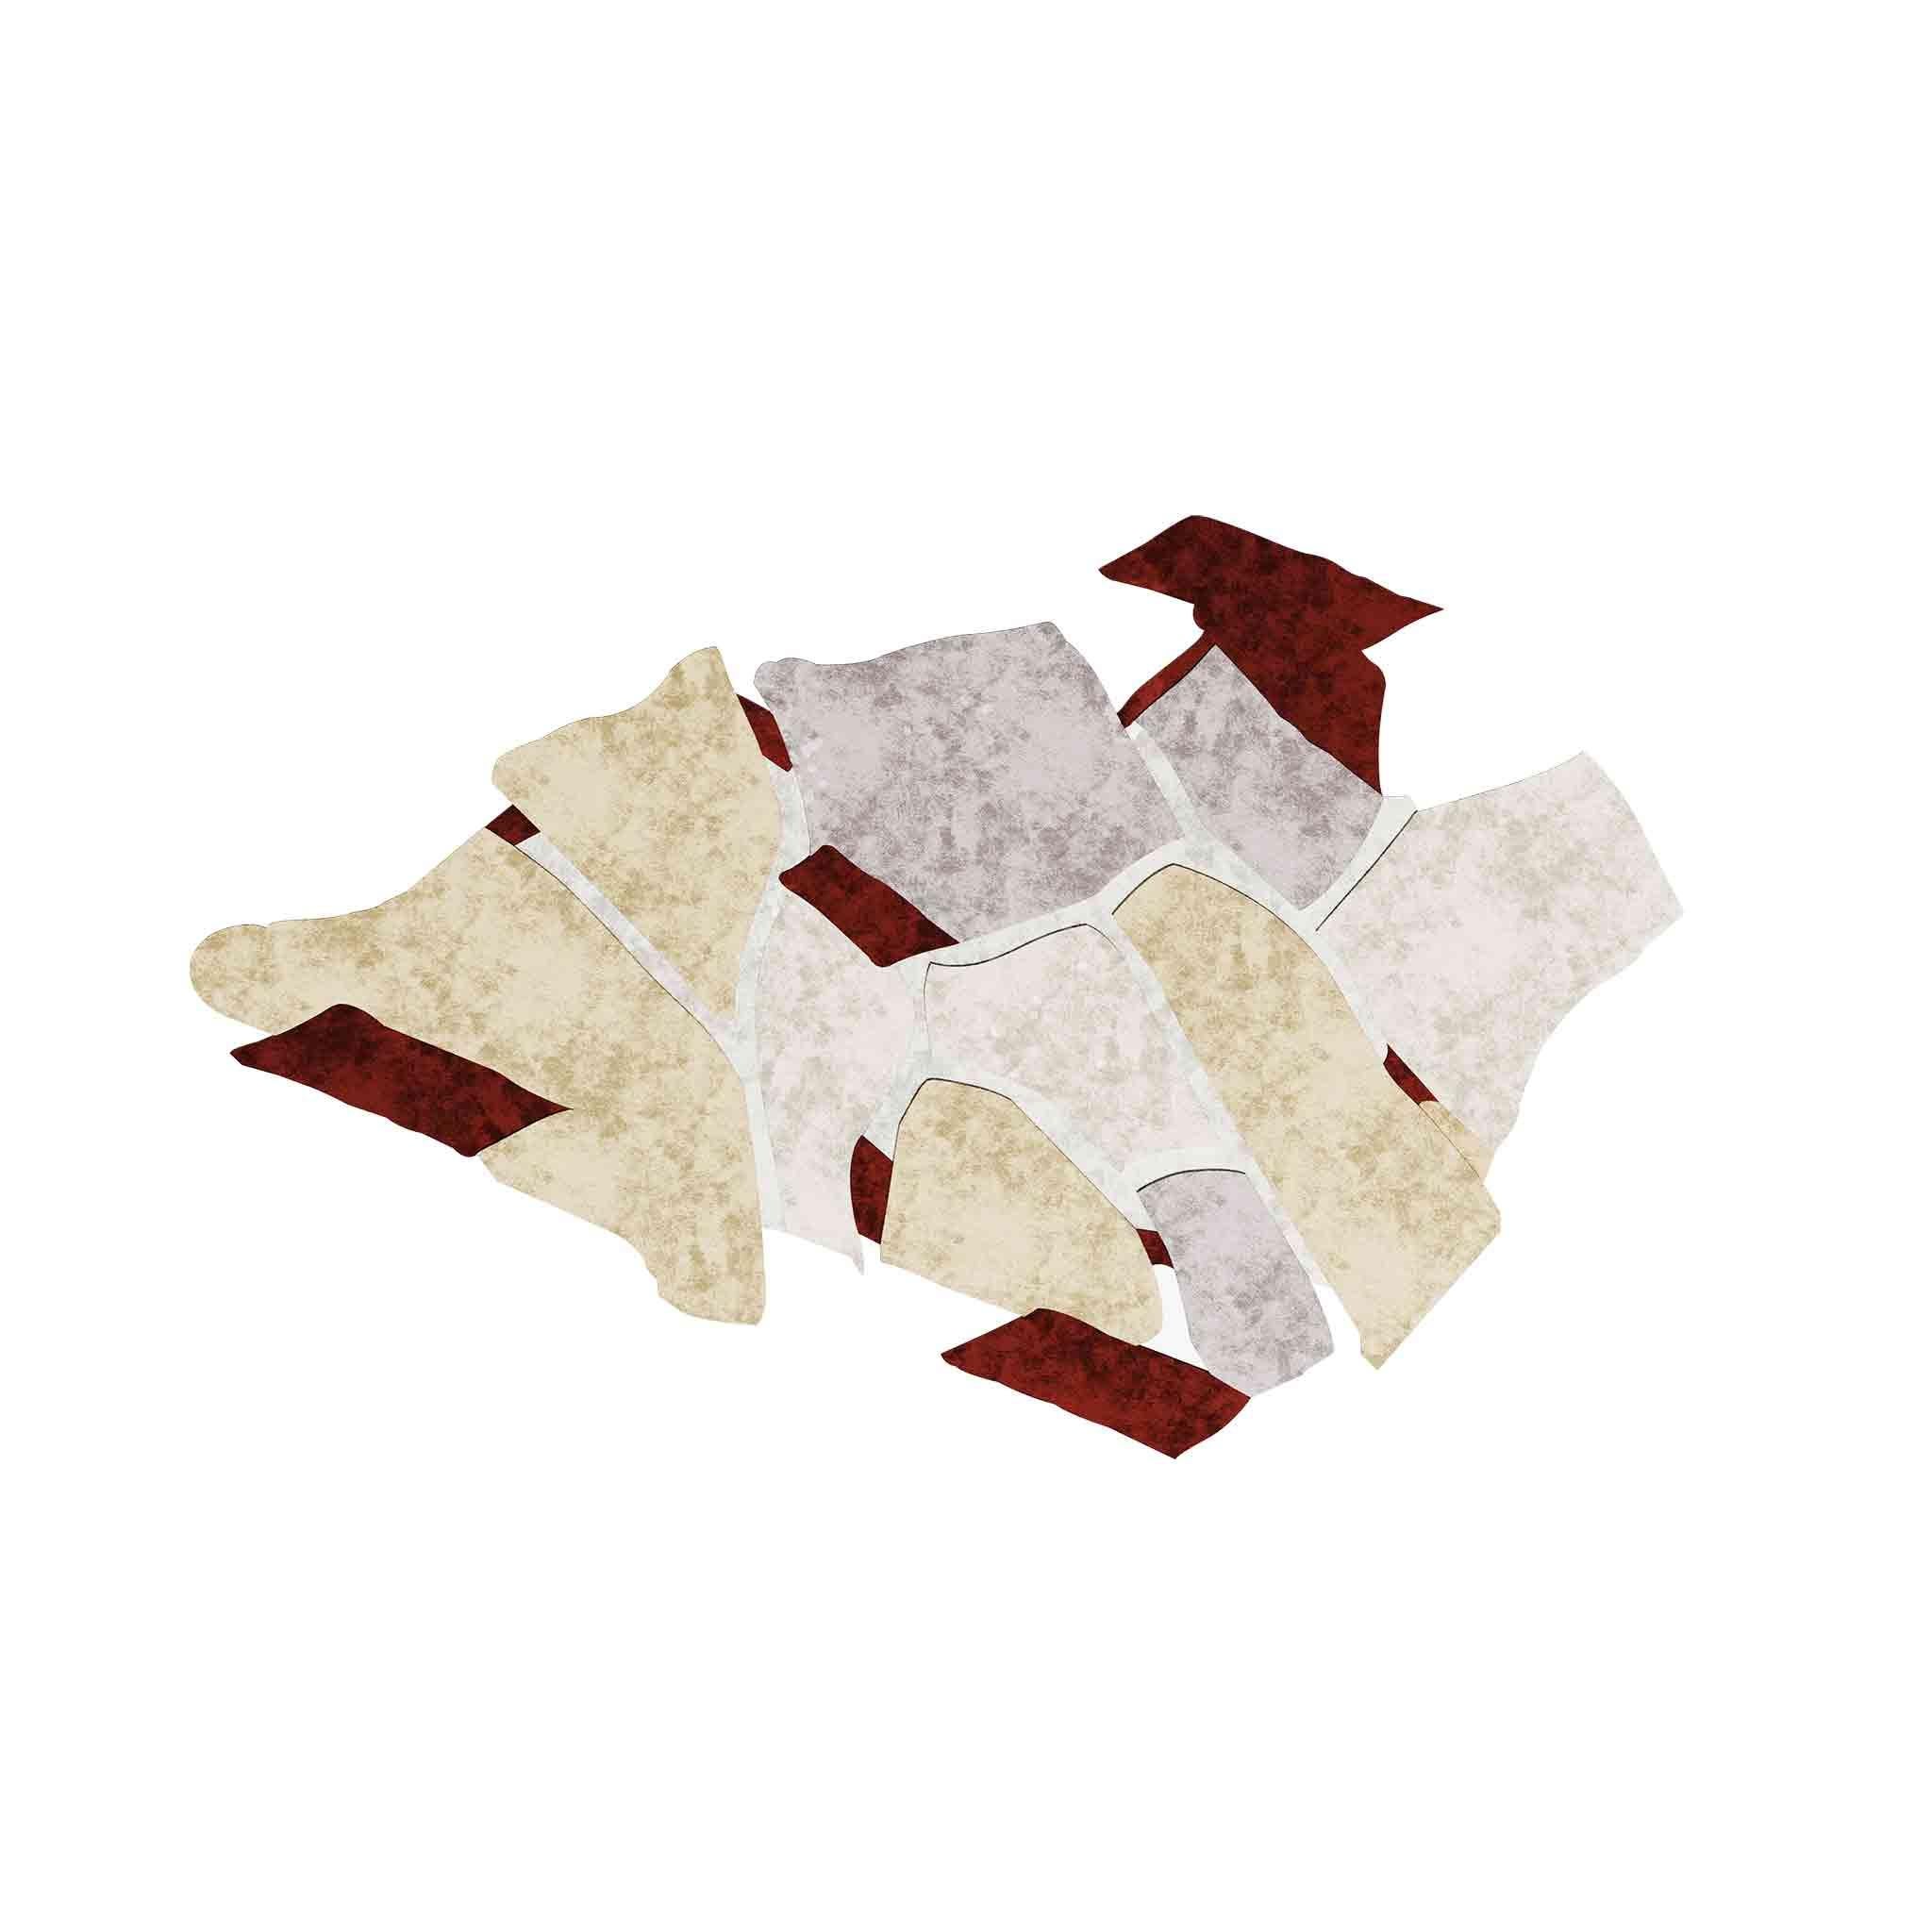 Tapis Shaped #042 also known as Crina Rug is a contemporary piece by HOMMÉS Studio x TAPIS Studio. This floor-art rug is a powerful combination of nude tones and organic shapes, an extraordinary modern rug perfect for contemporary interiors
Other